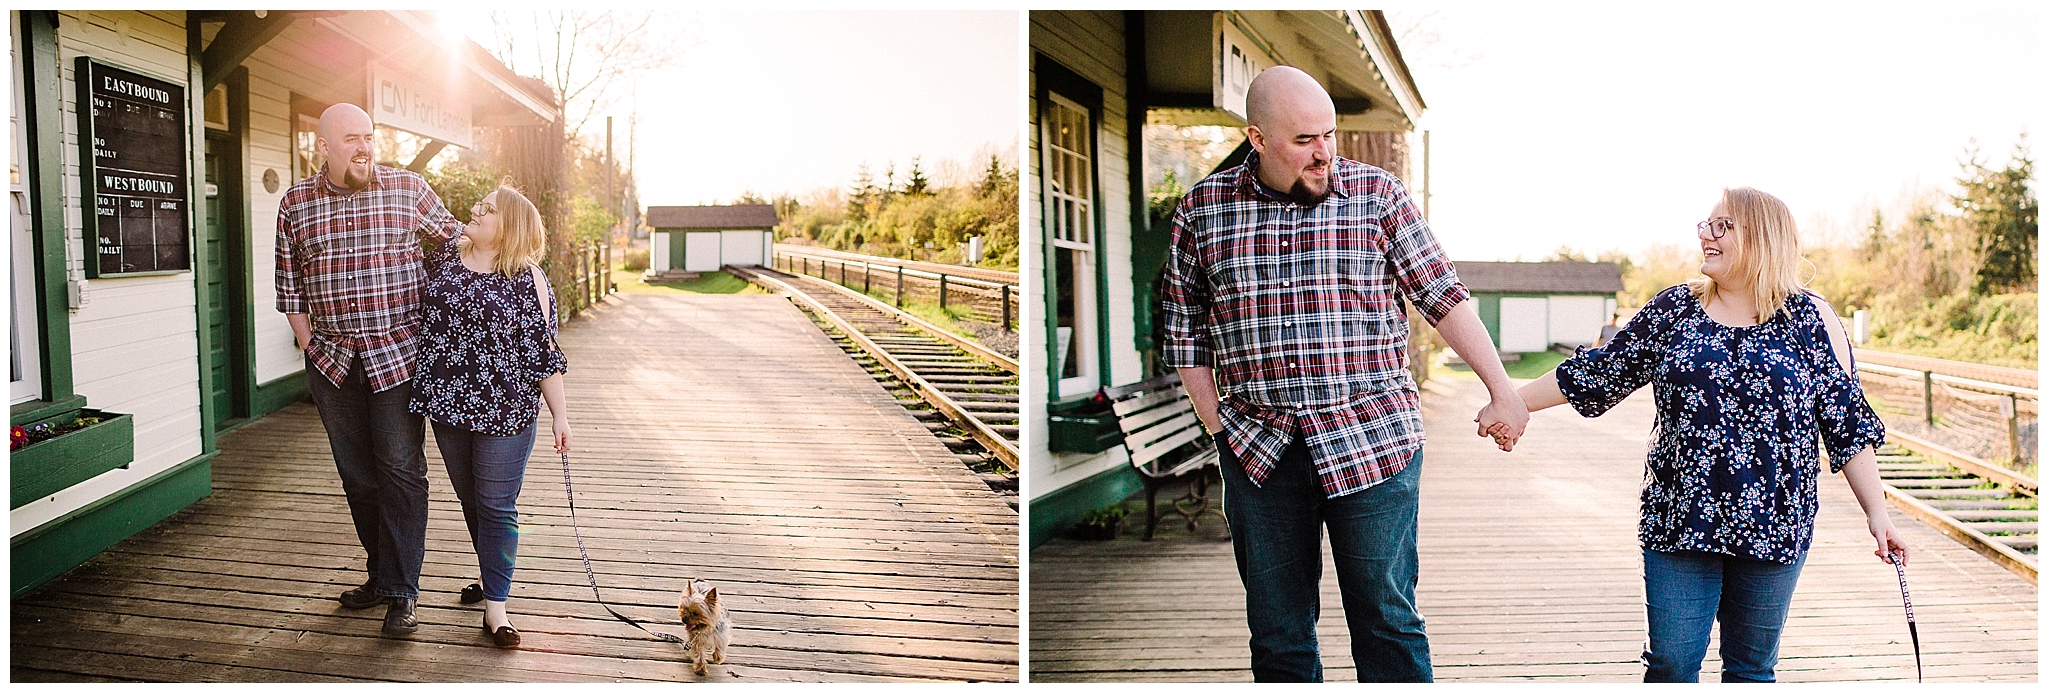 fort langley engagement photographer